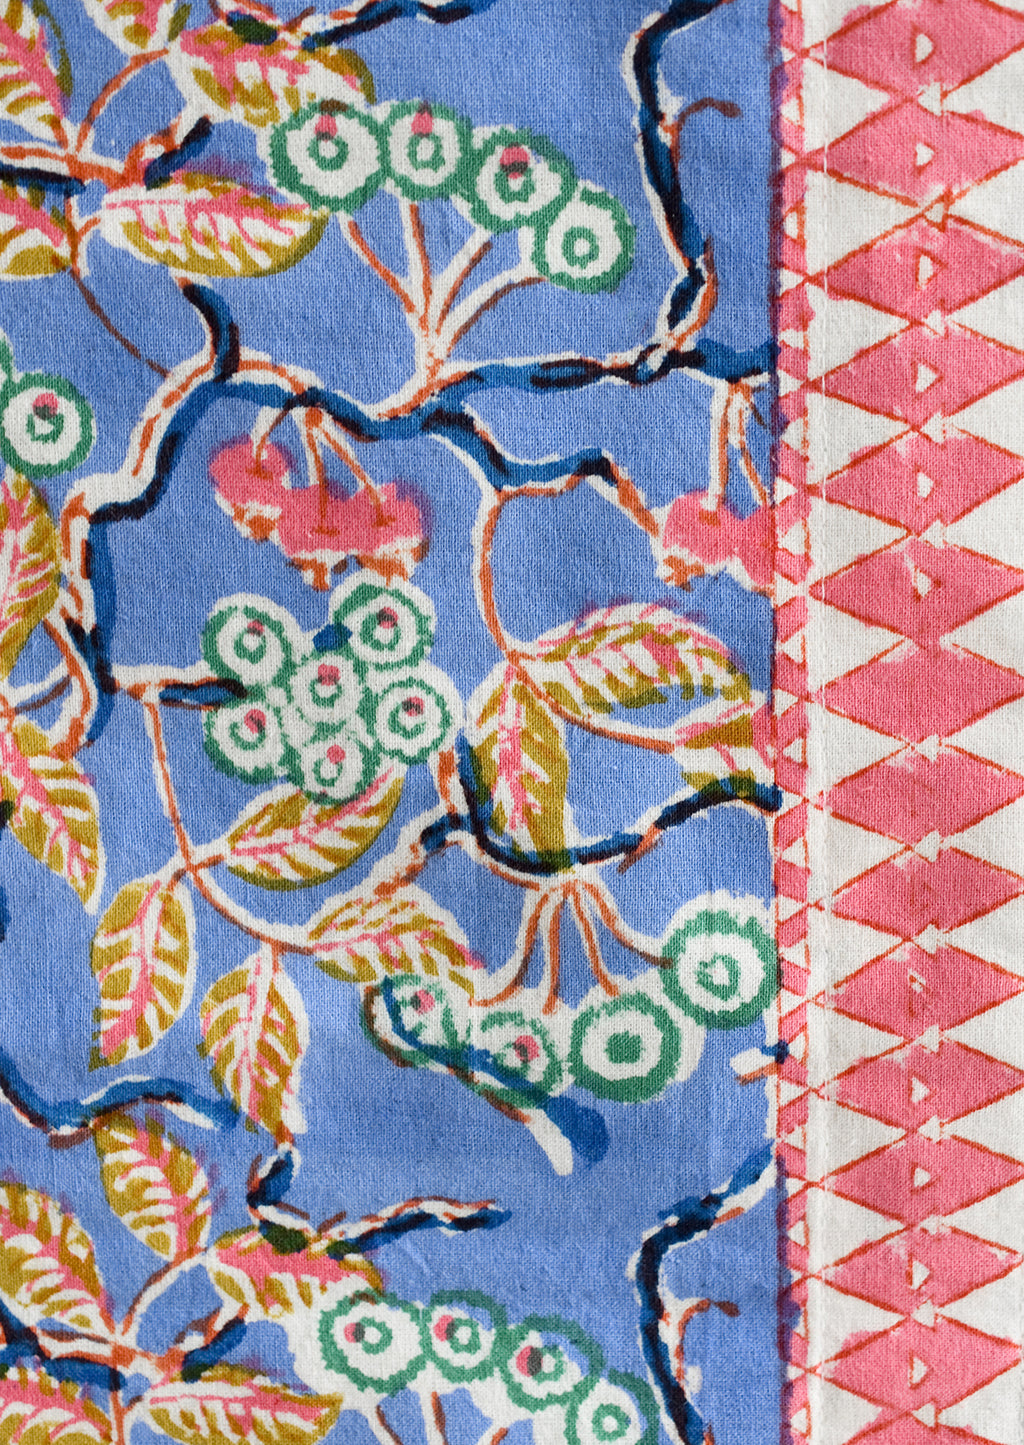 2: A block printed table runner in blue and pink floral.